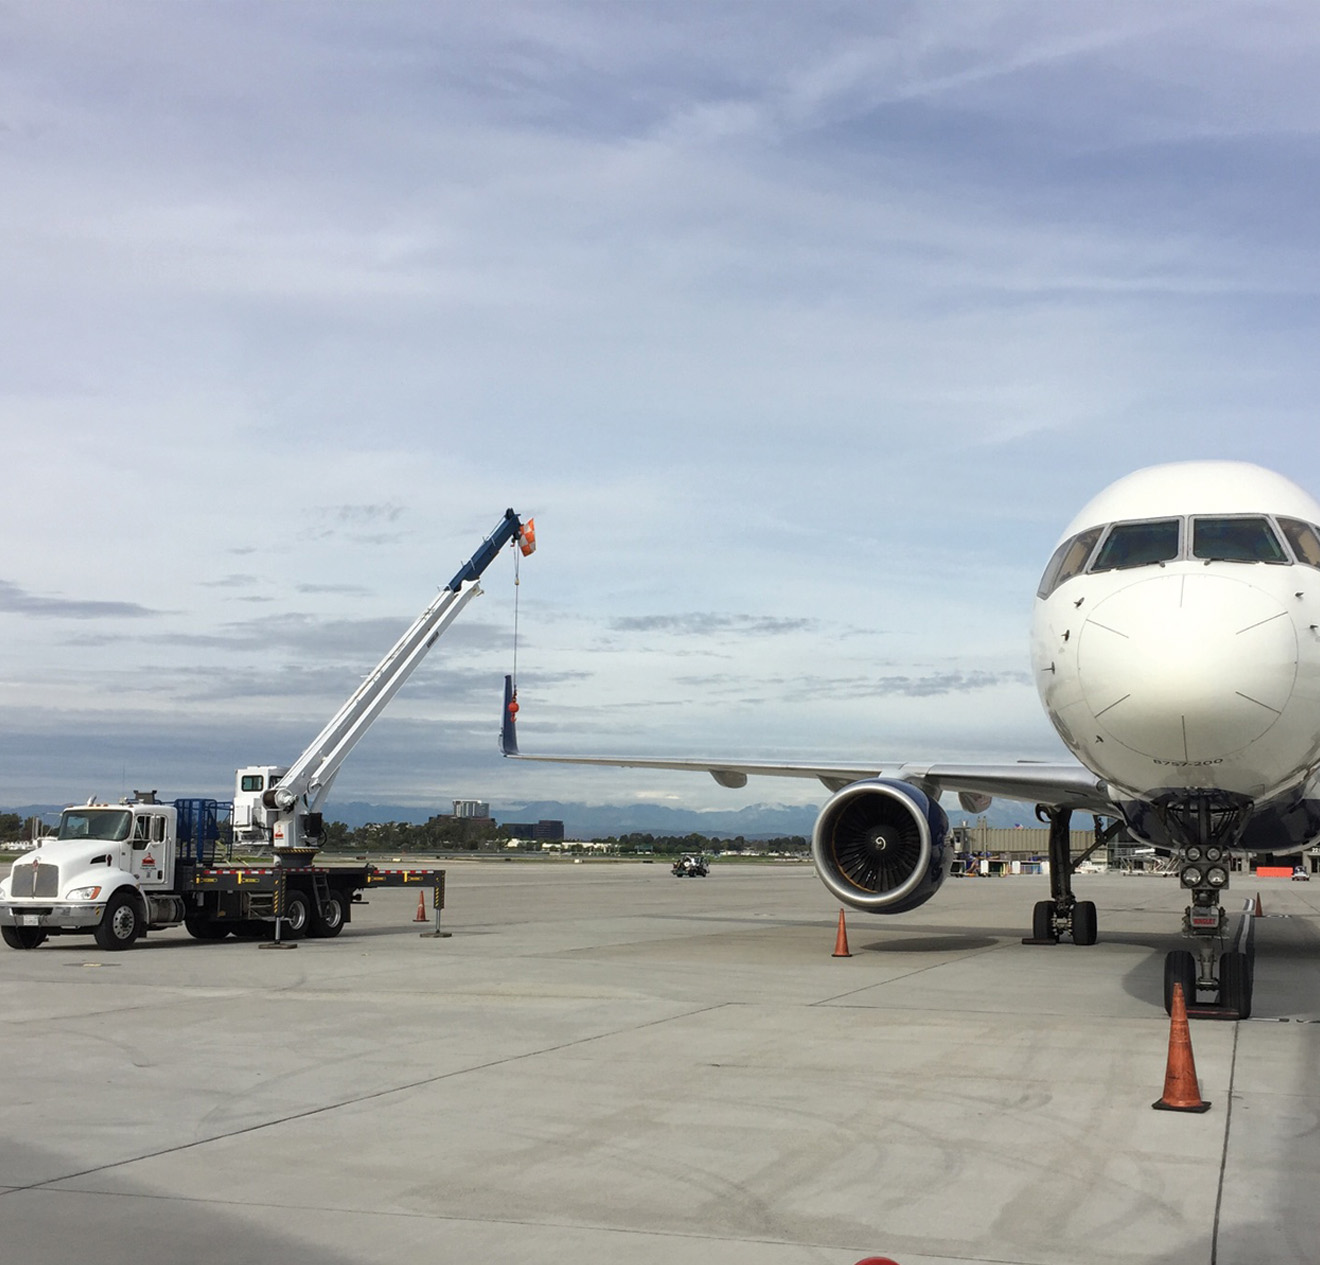 Crane lifting an airplane wing on a tarmac at a commercial airport